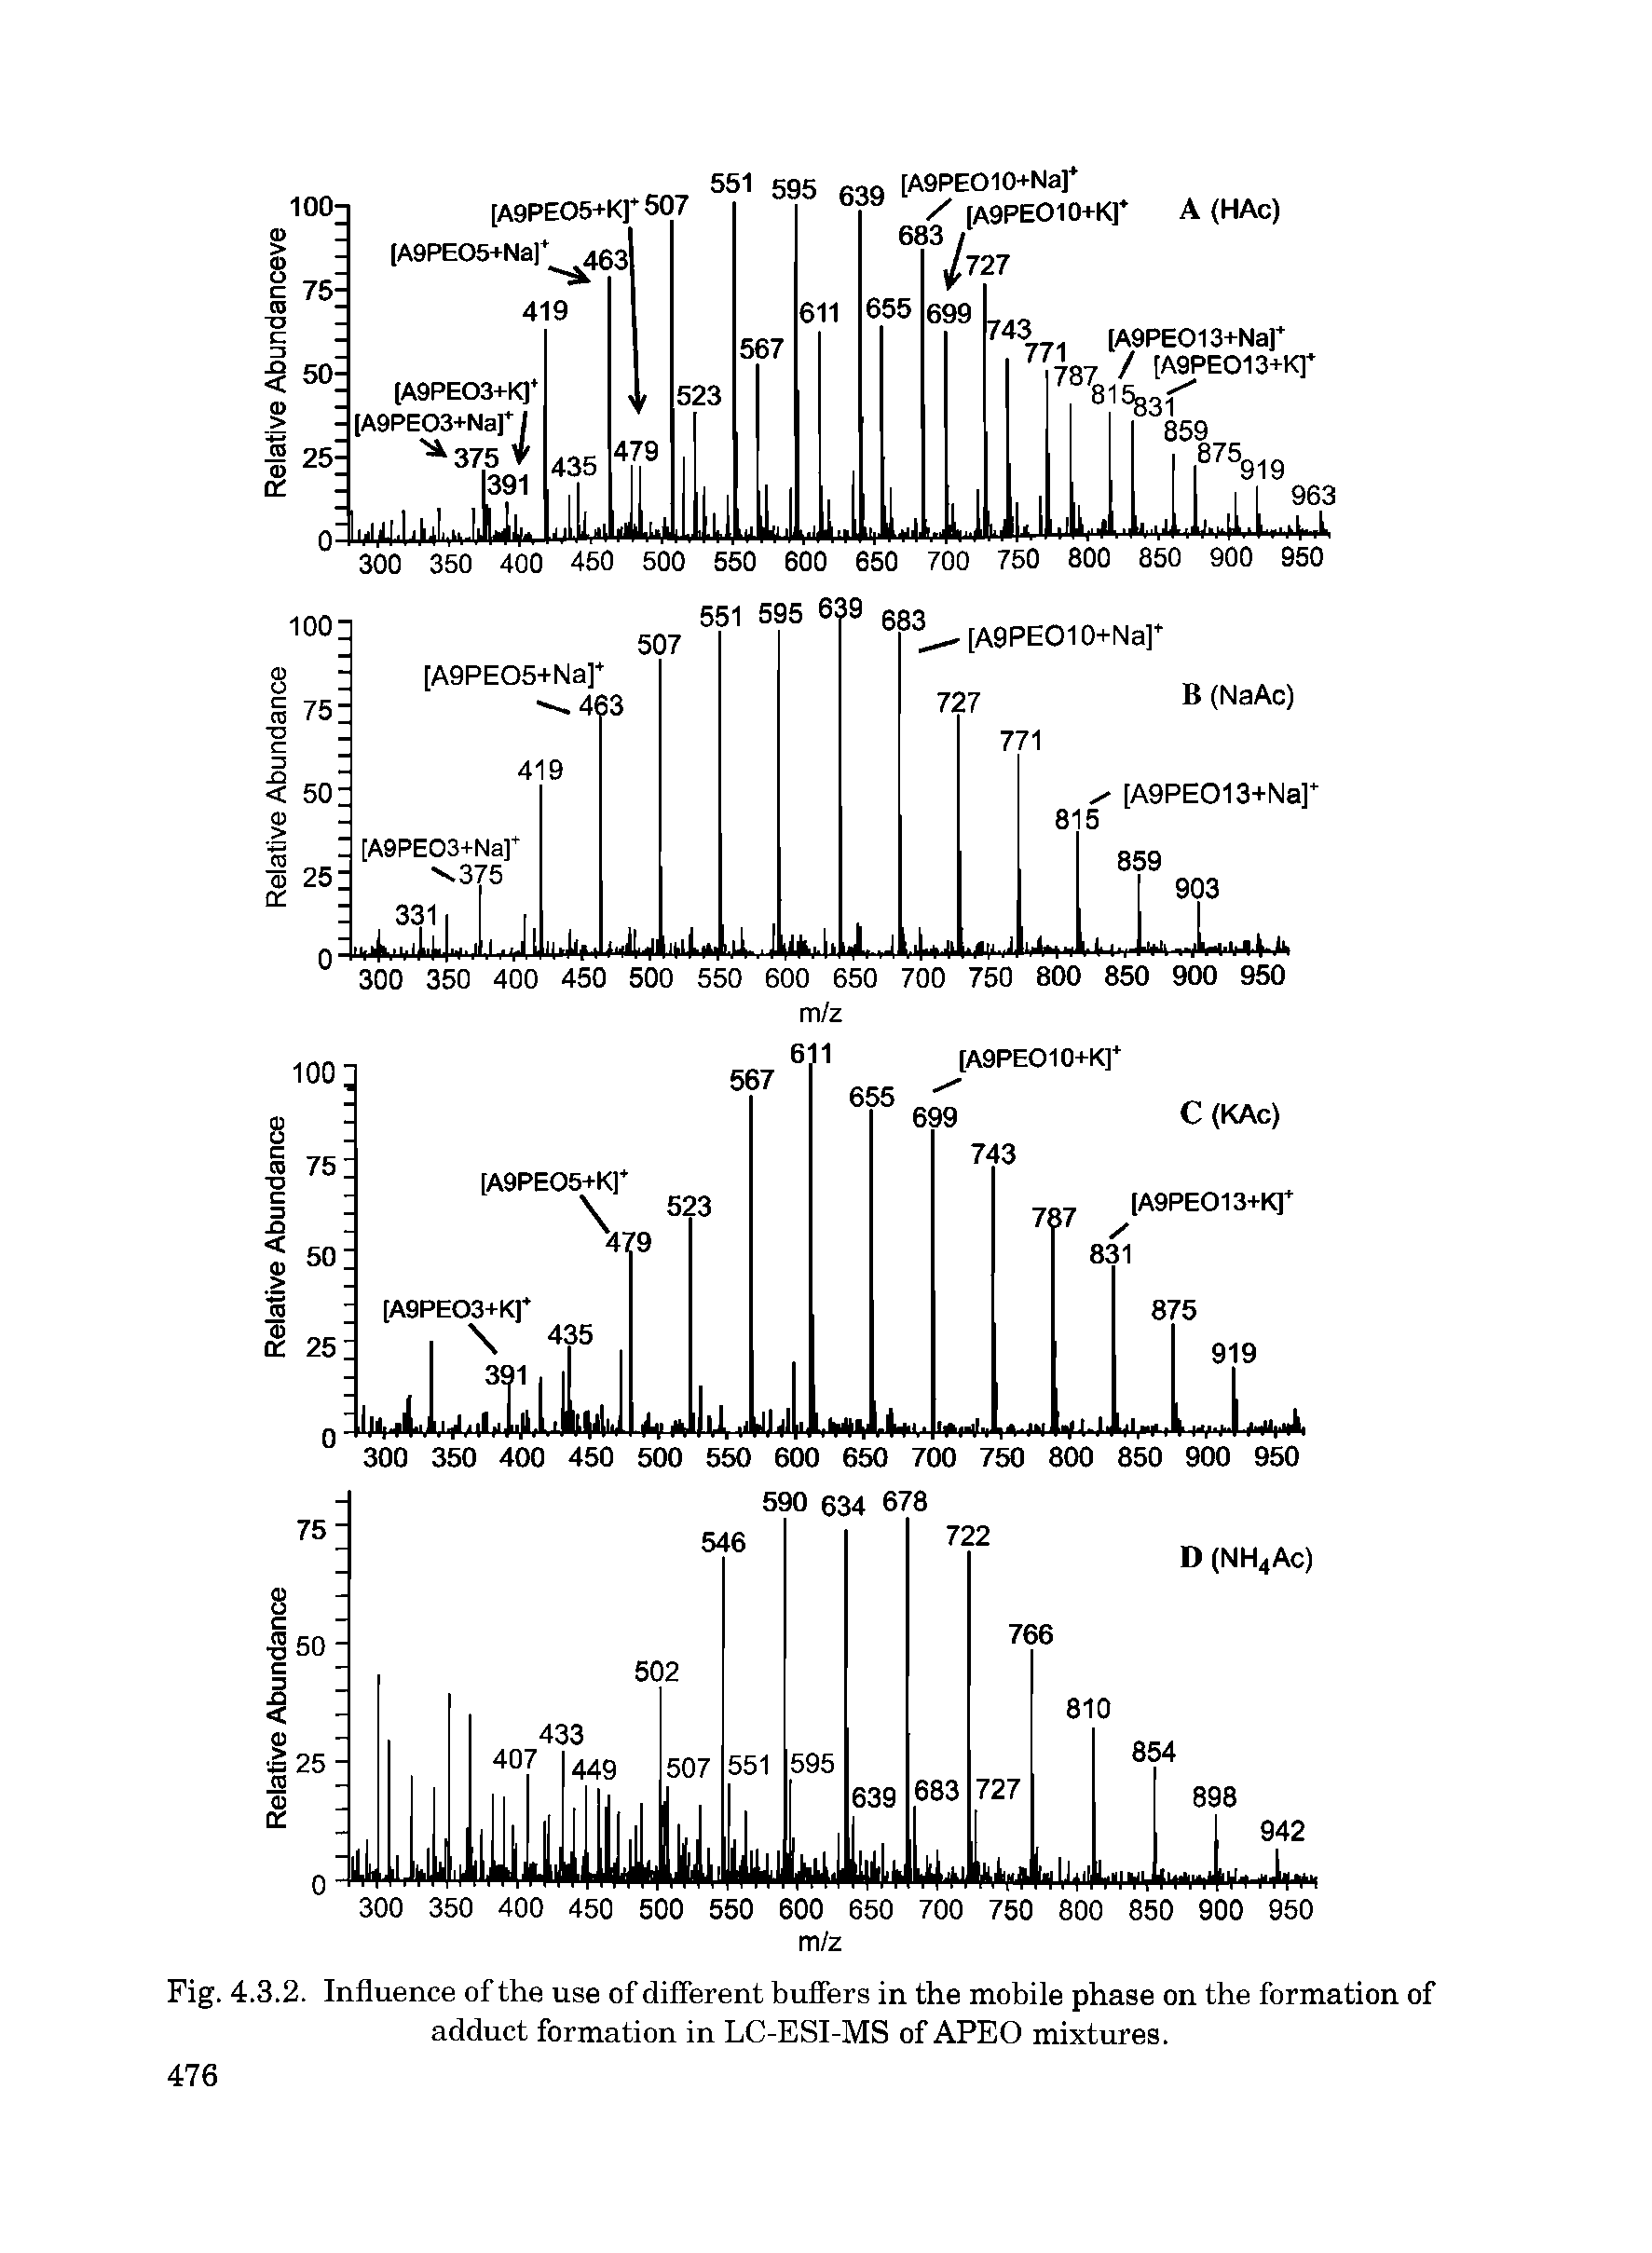 Fig. 4.3.2. Influence of the use of different buffers in the mobile phase on the formation of adduct formation in LC-ESI-MS of APEO mixtures.